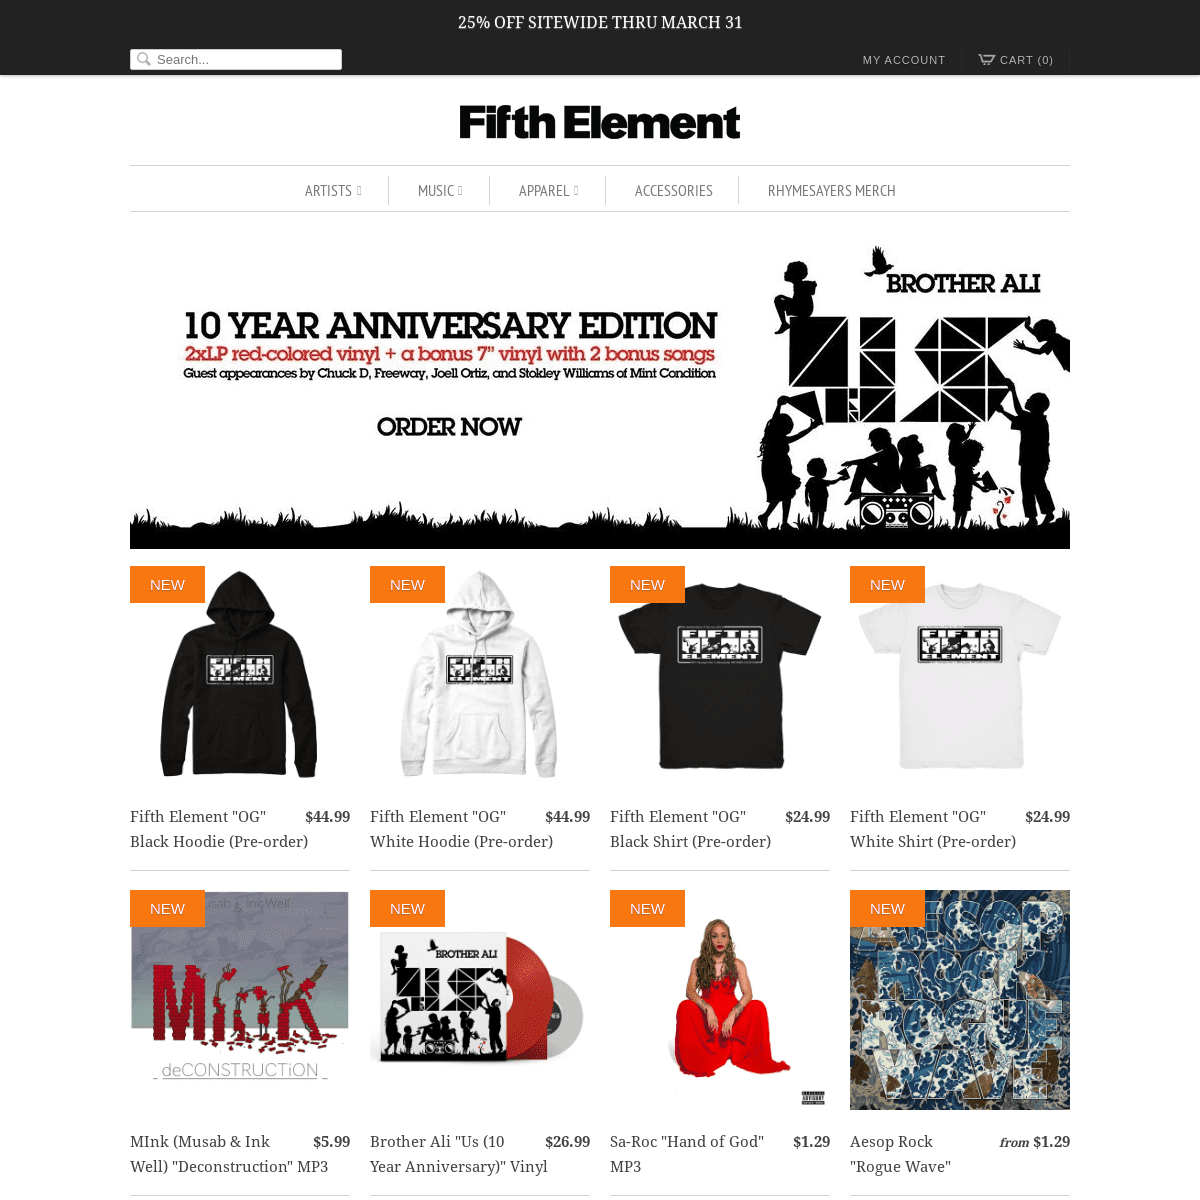 A complete backup of fifthelementonline.com